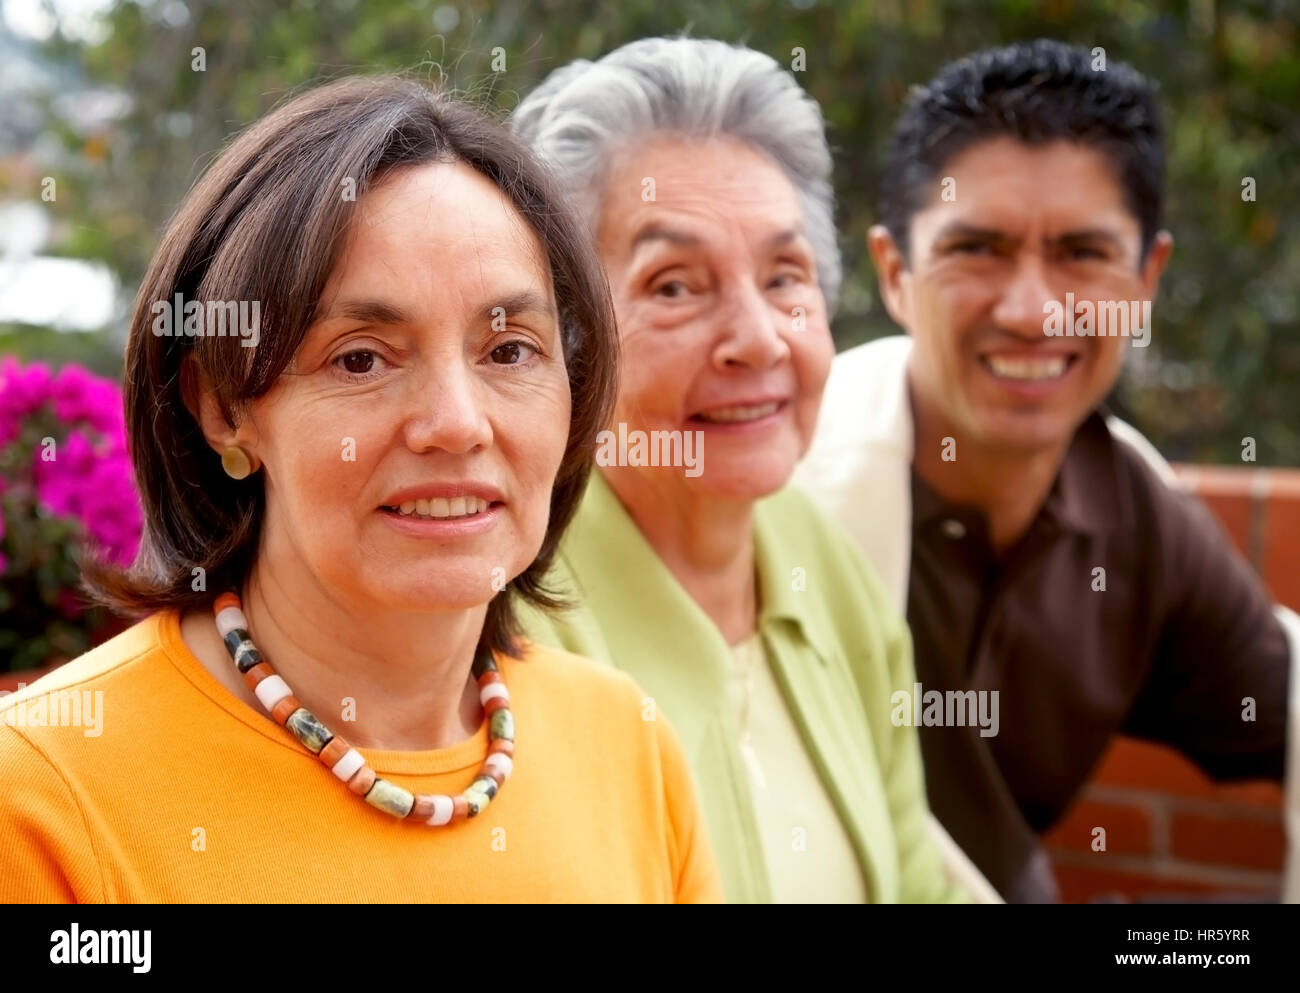 happy two generation family portrait smiling outdoors Stock Photo